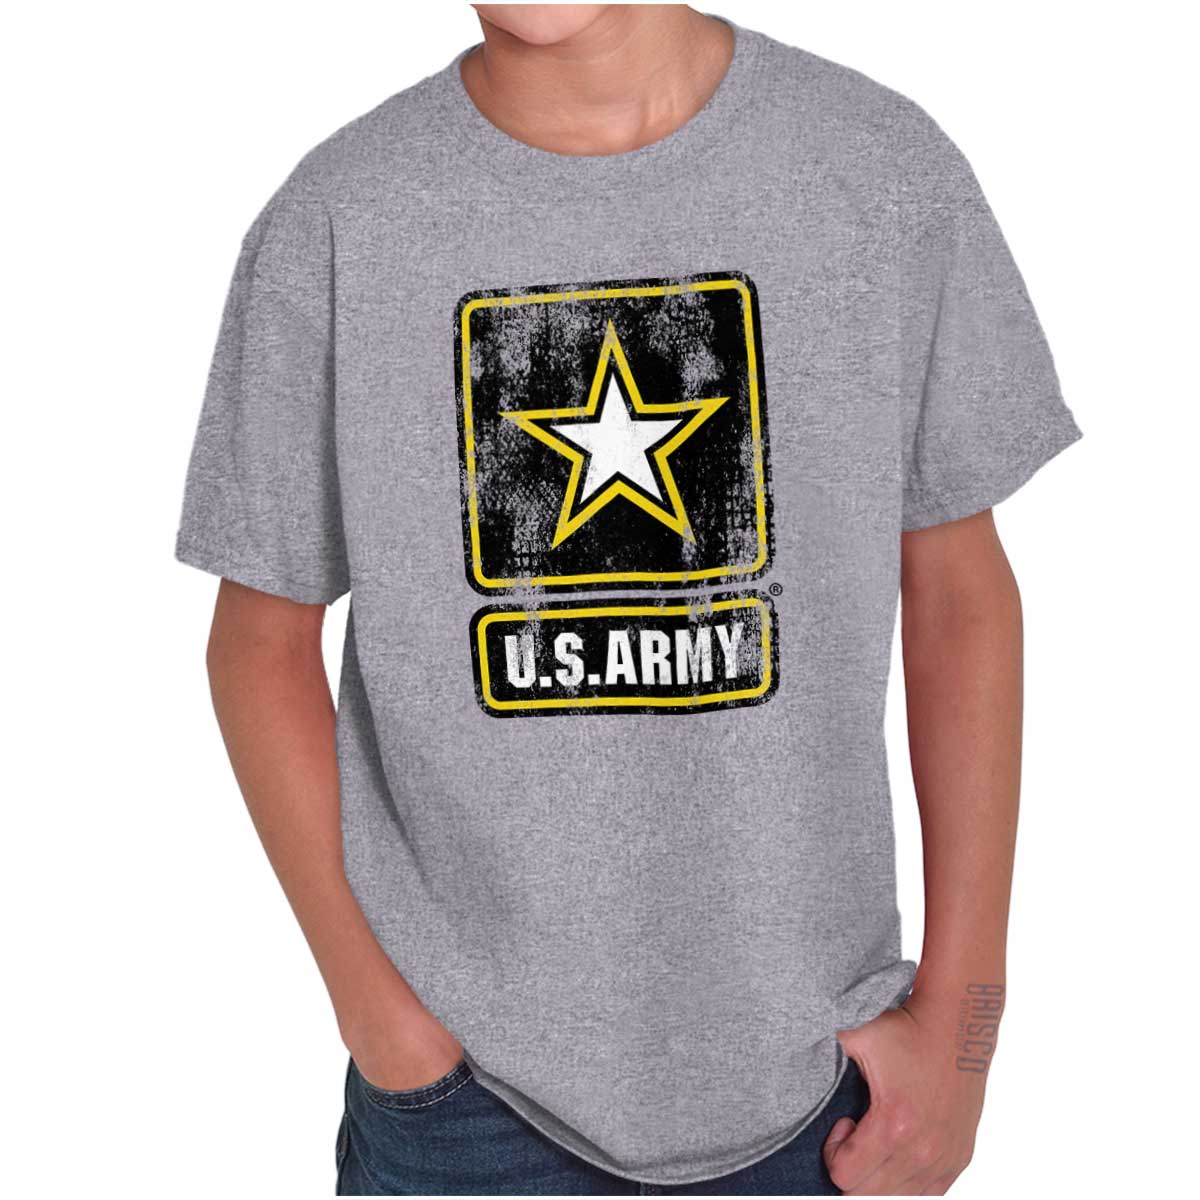 Armed Forces Officially Licensed US Army Logo Youth T-Shirt Tees Tshirt ...